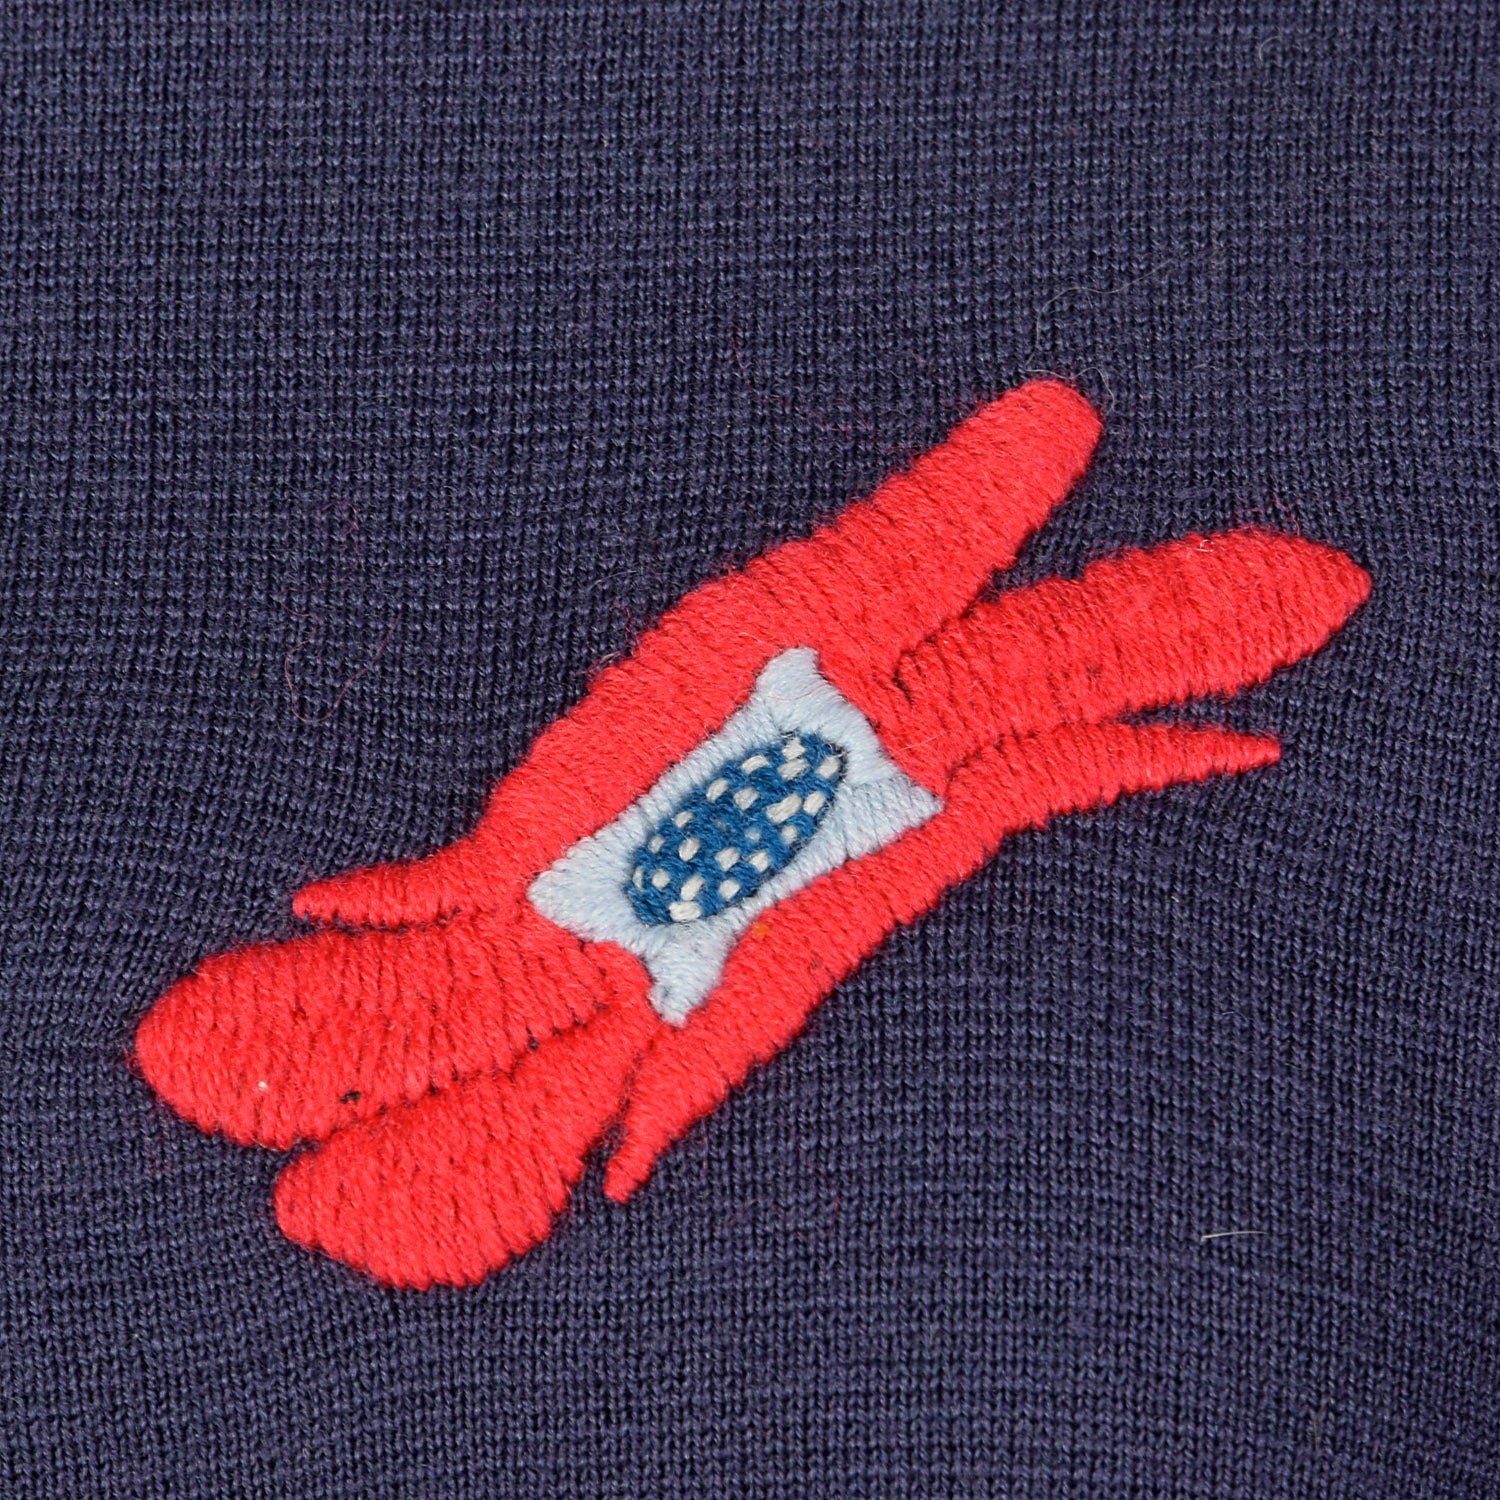 Small 1960s Navy Wool Novelty Sweater with Flower Embroidery